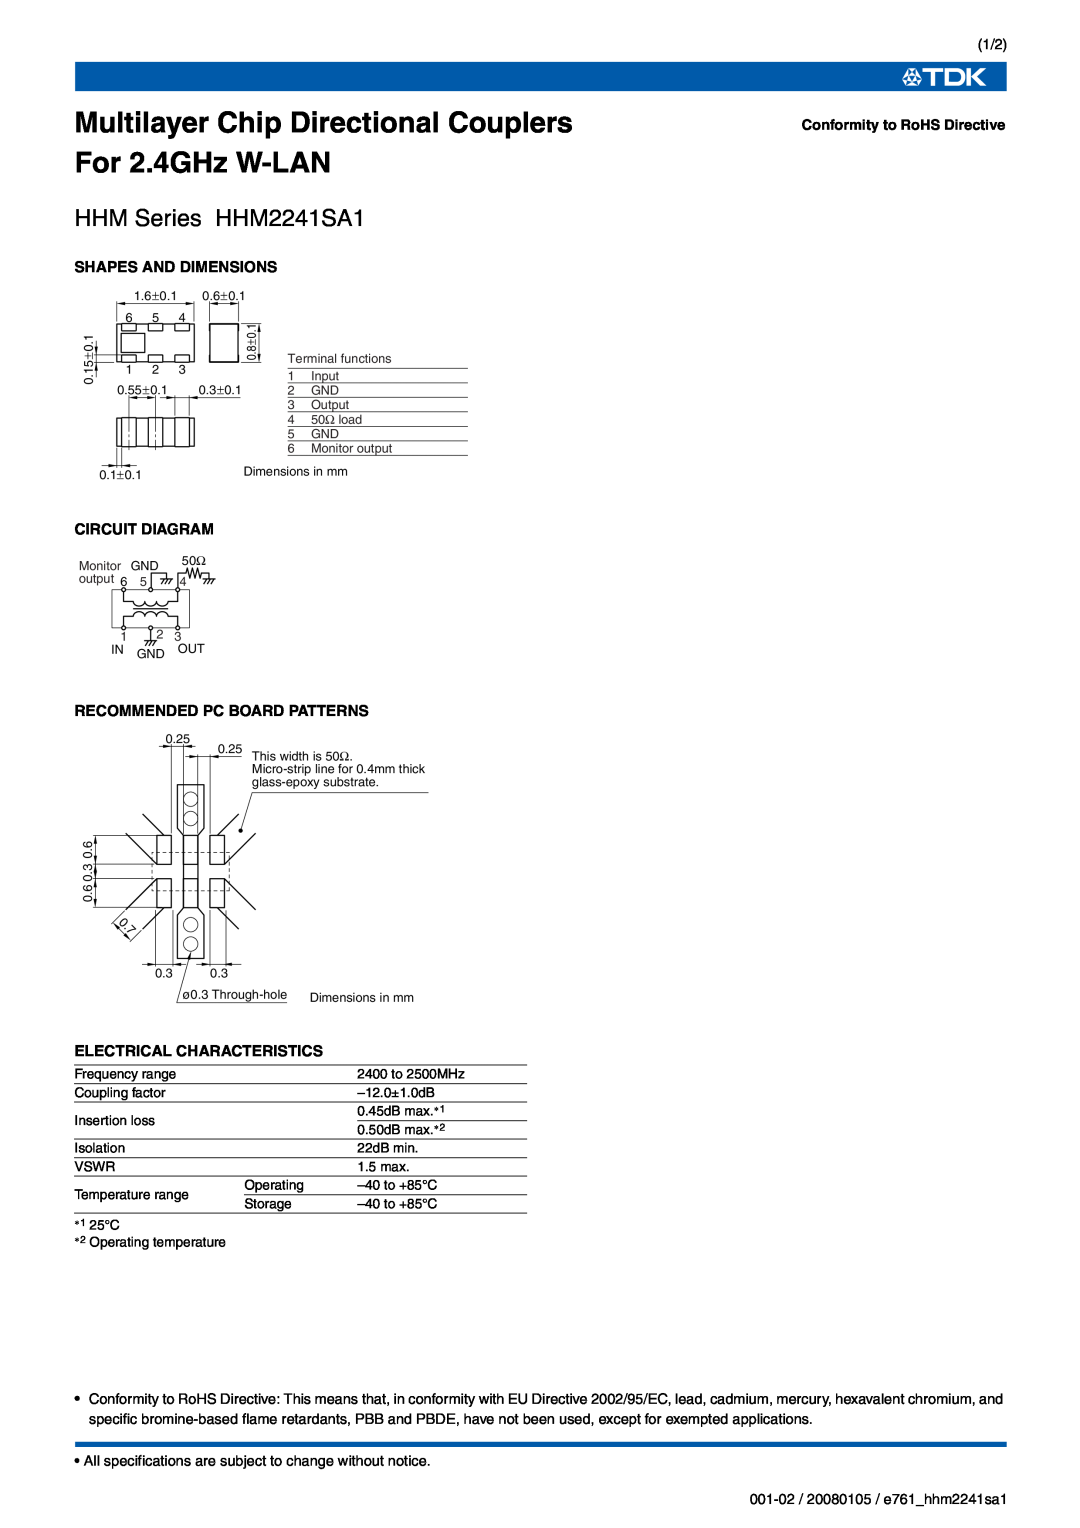 TDK HHM Series HHM2241SA1 specifications Shapes And Dimensions, Conformity to RoHS Directive, Circuit Diagram 